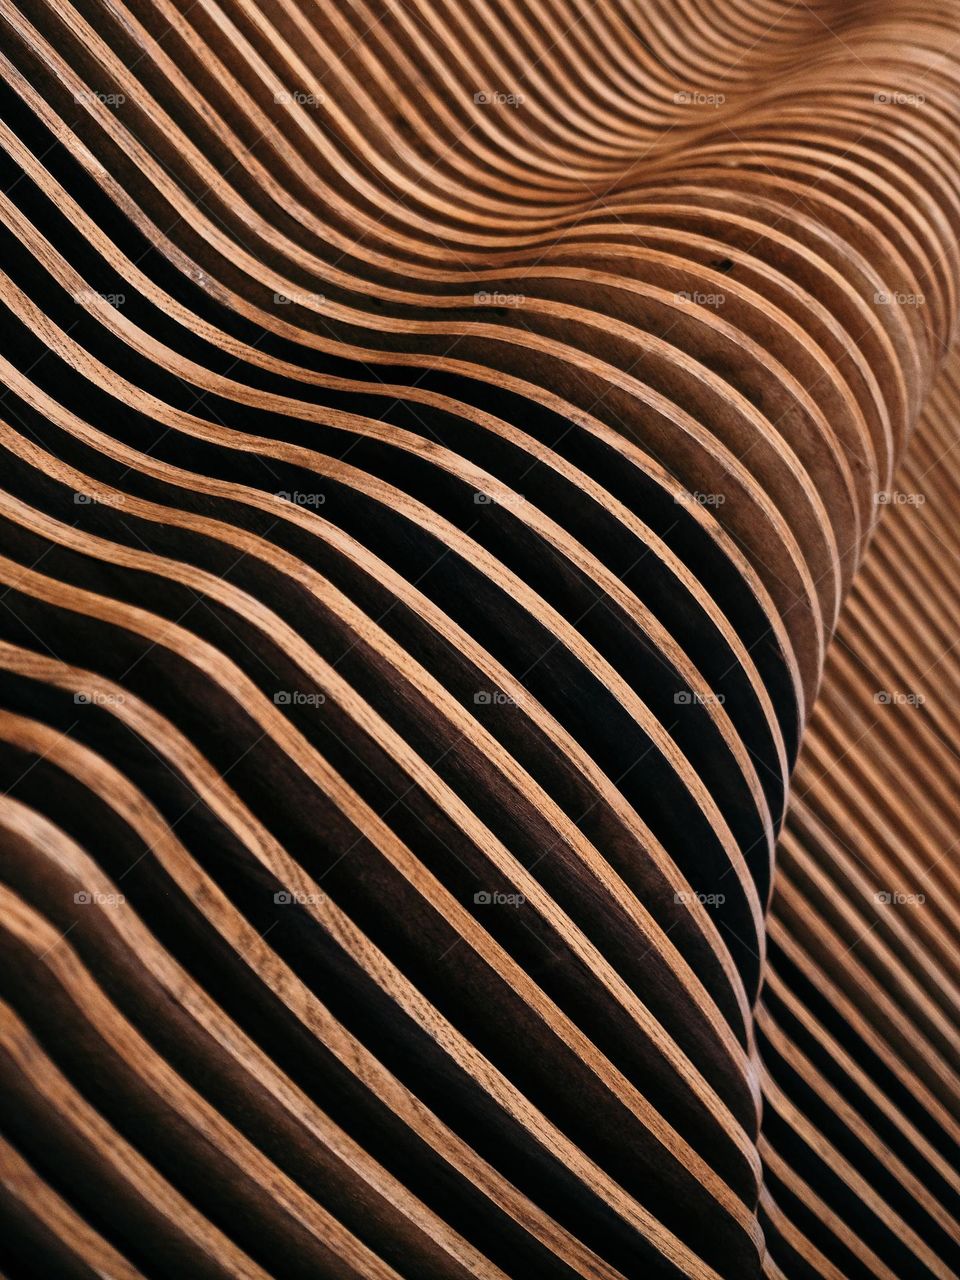 Close-up detail of wood slats creating a flowing pattern